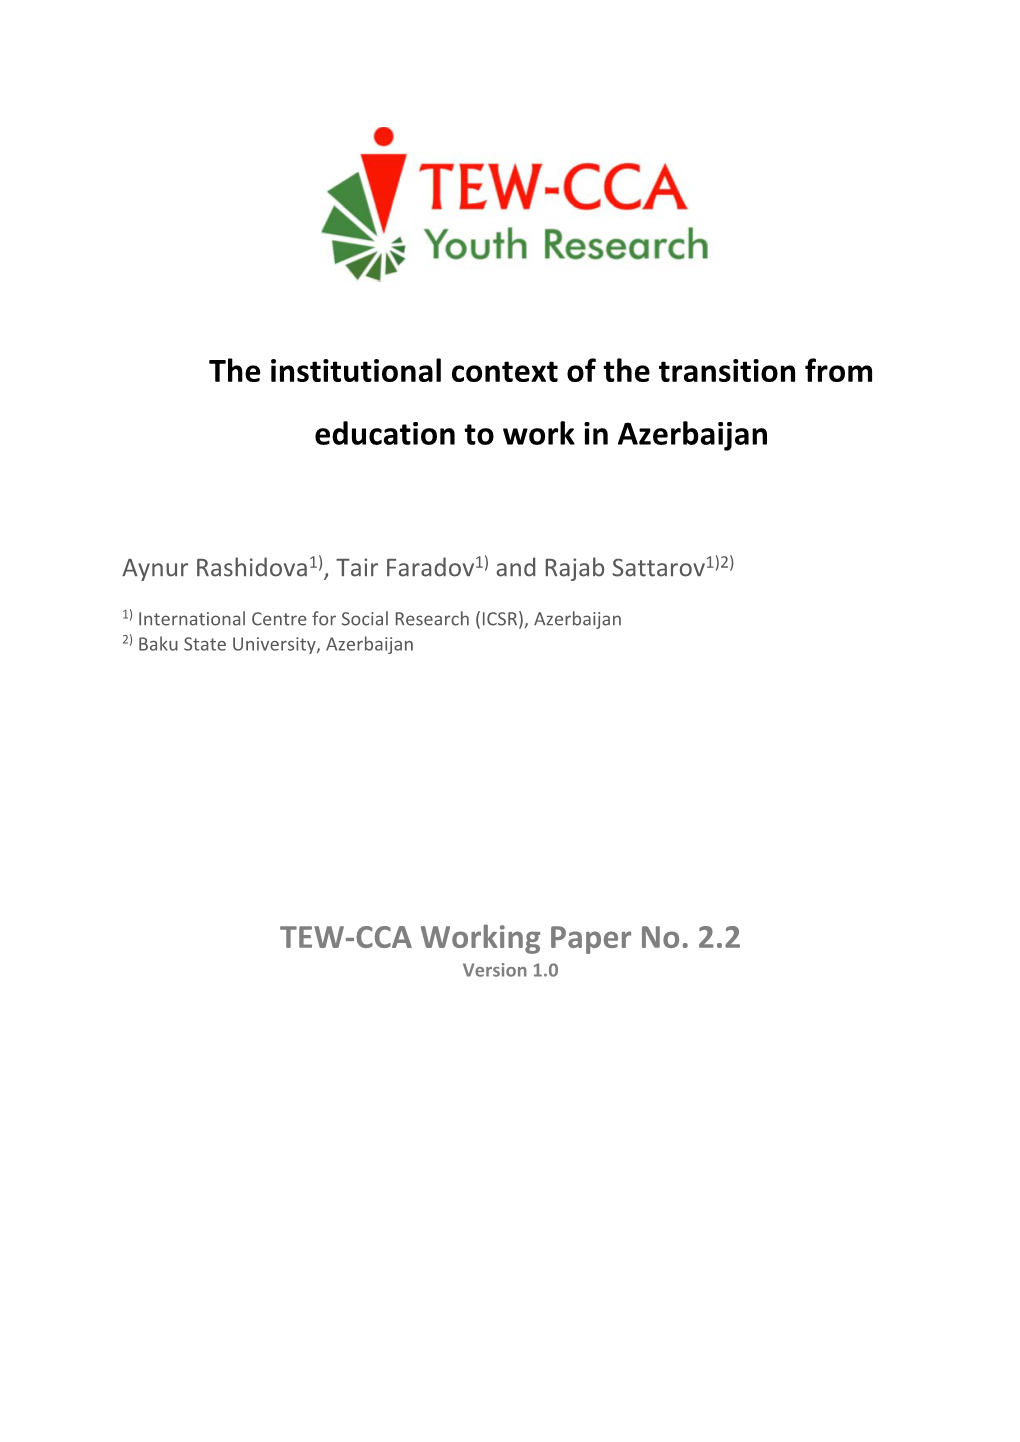 The Institutional Context of the Transition from Education to Work in Azerbaijan